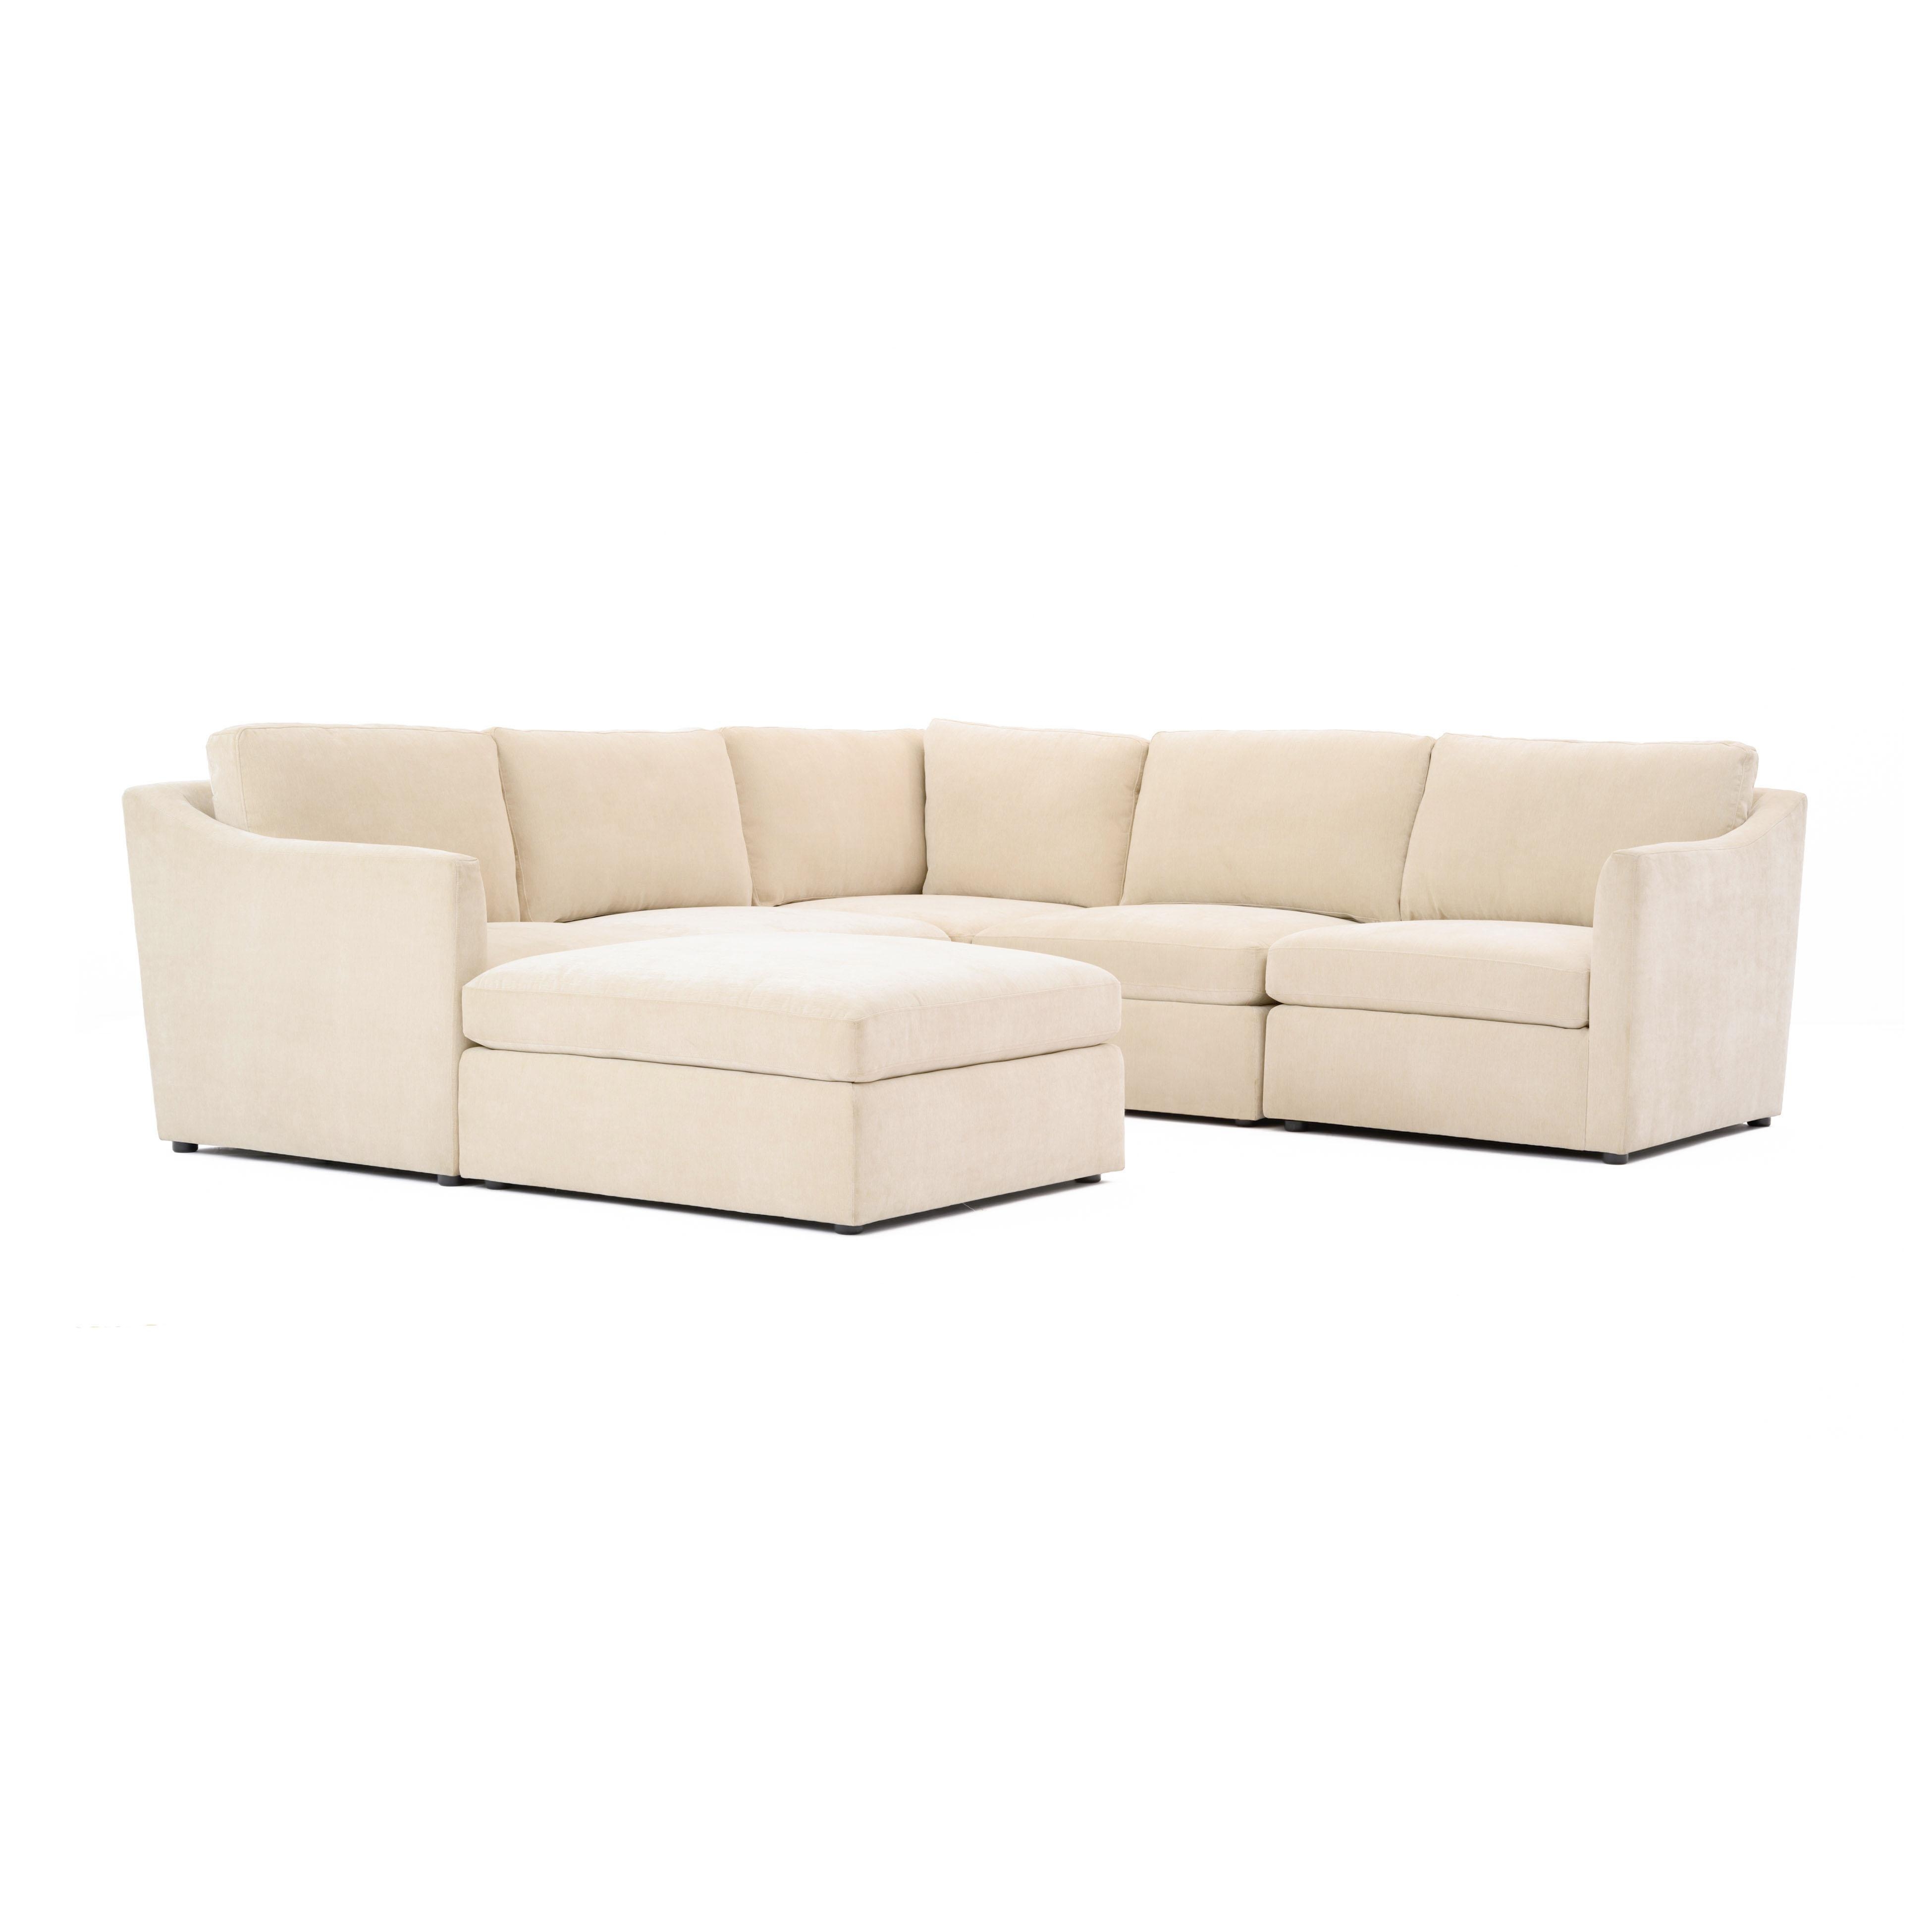 Aiden Beige Modular Chaise Sectional - Image 0